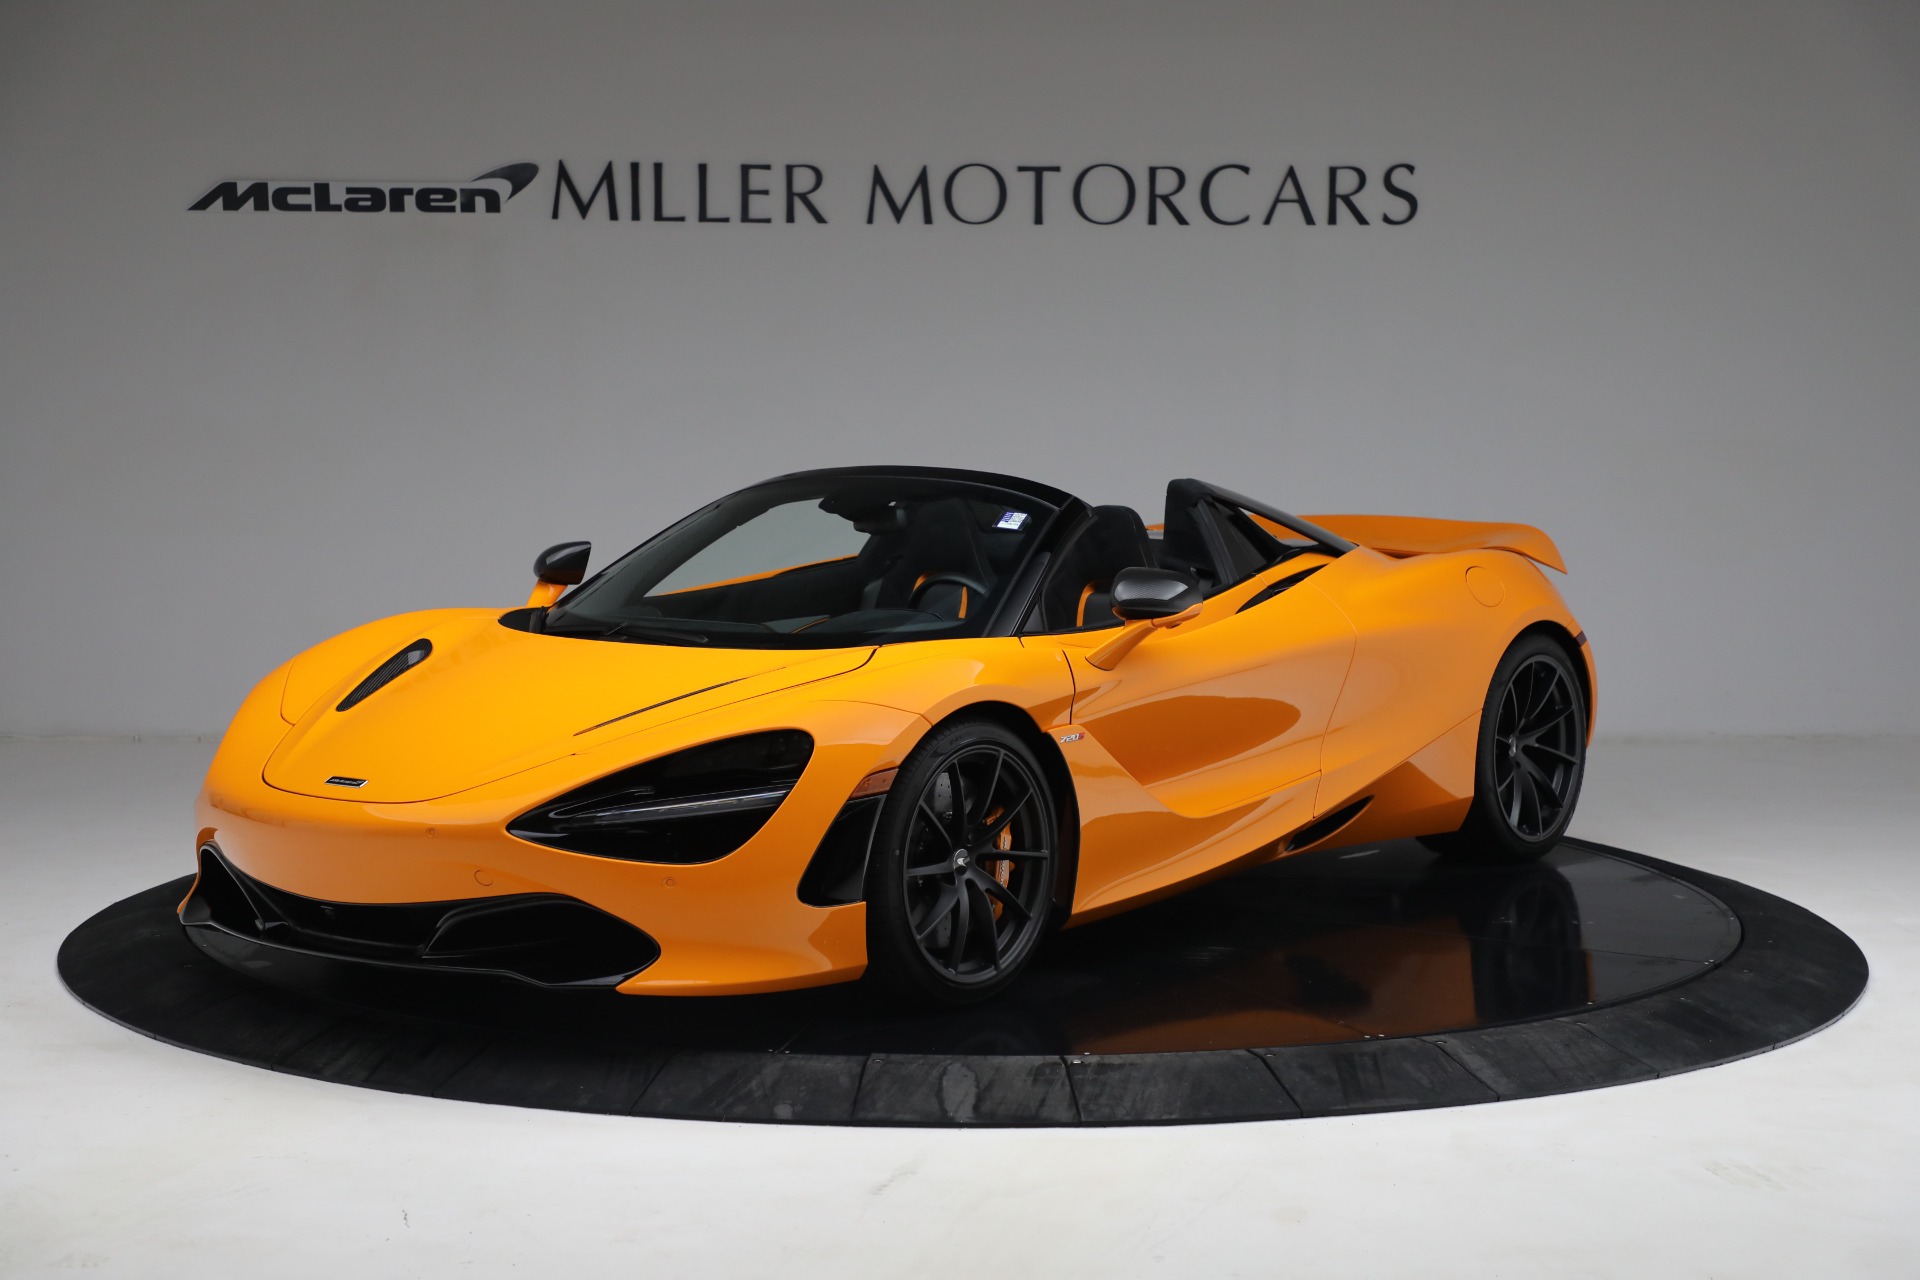 New 2021 McLaren 720S Spider for sale Sold at Aston Martin of Greenwich in Greenwich CT 06830 1